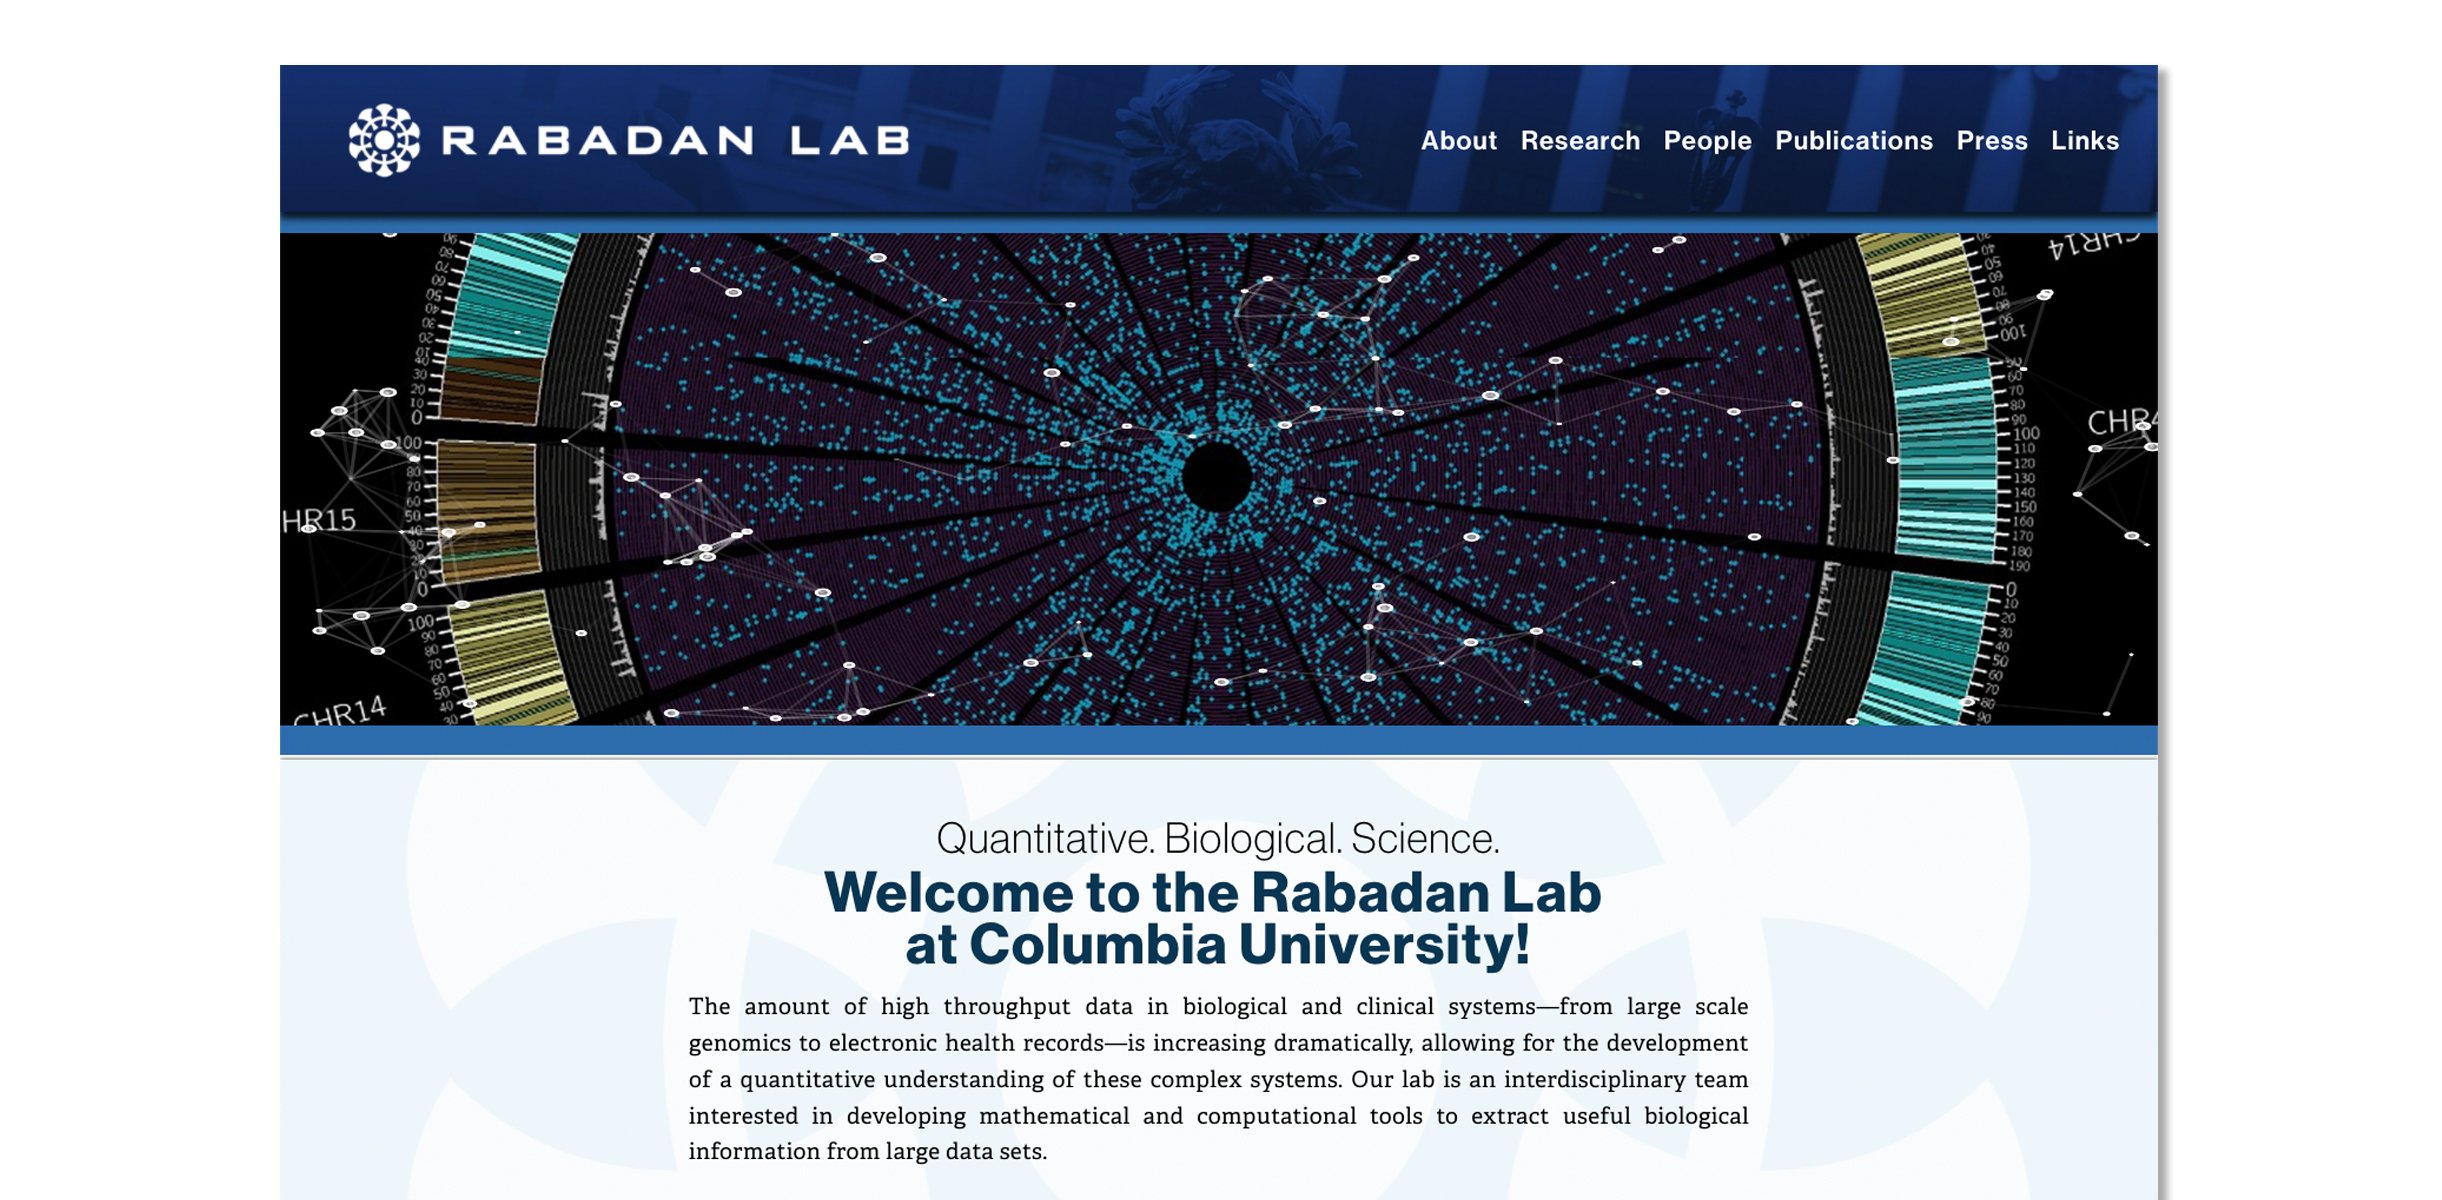 Website design and production for Rabadan Lab at Columbia University by SP STUDIOS.